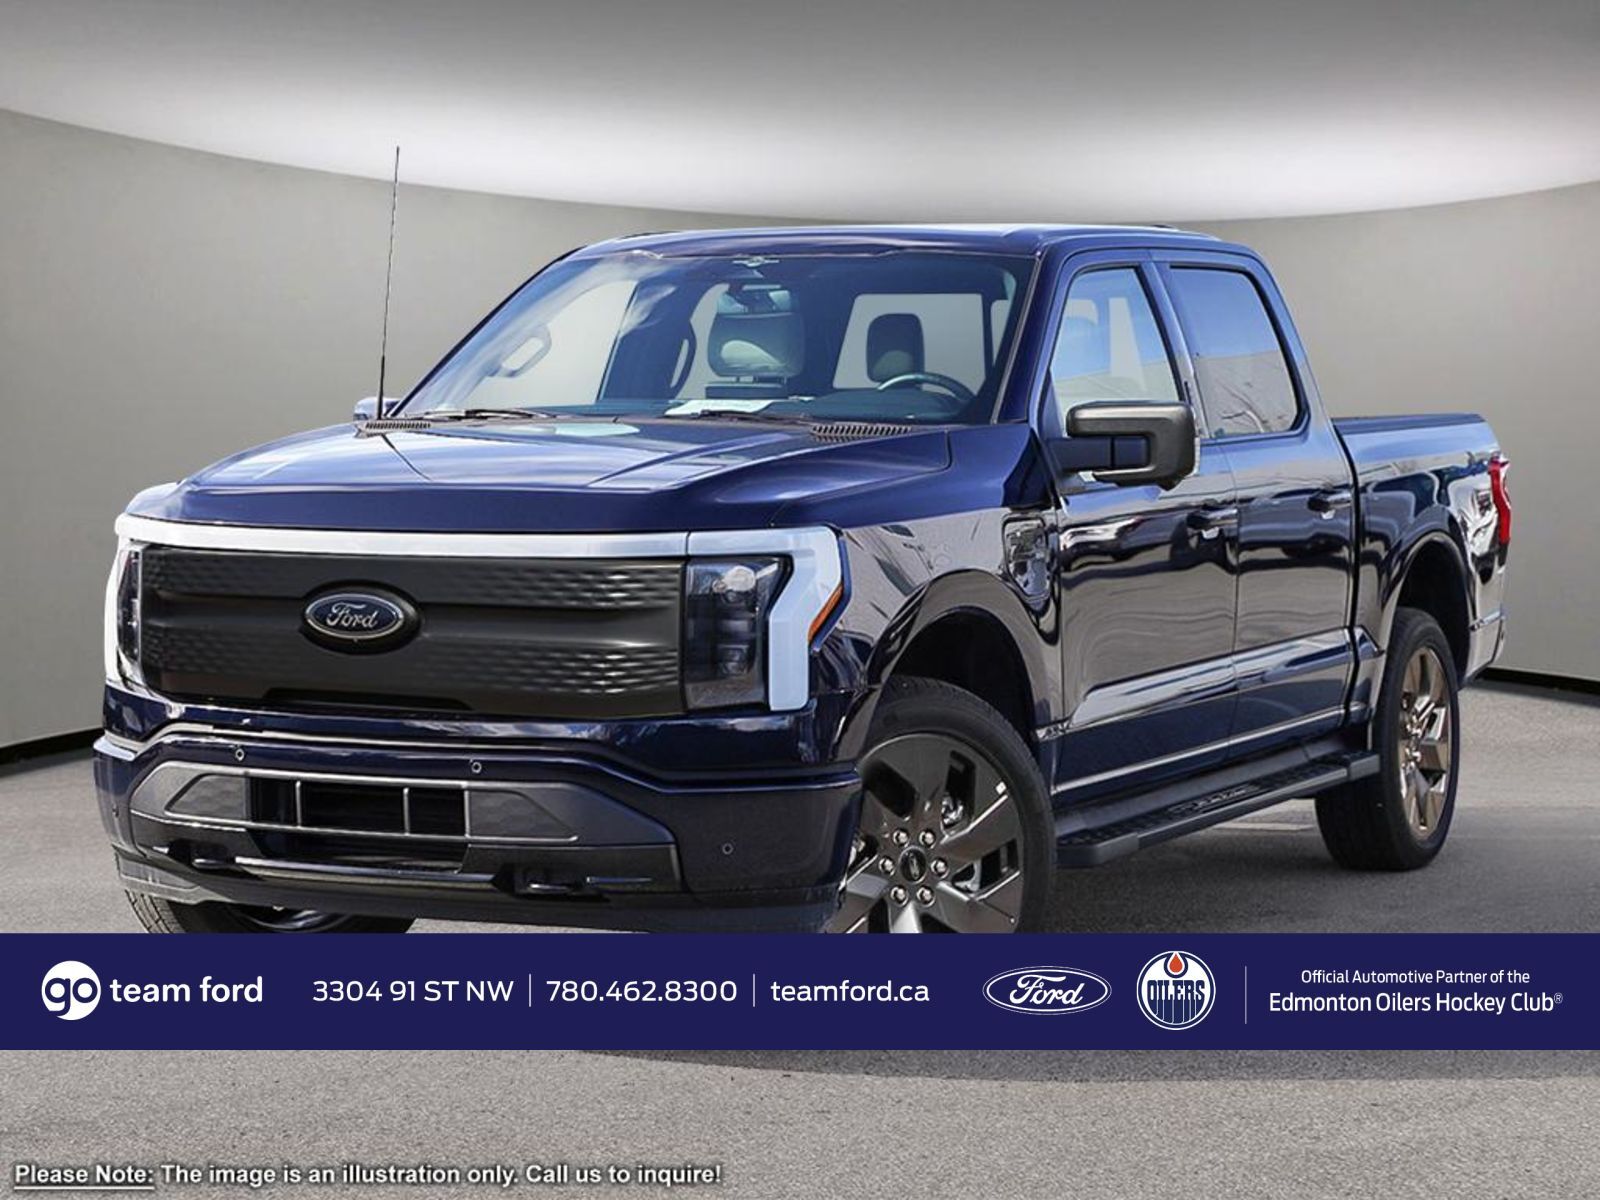 2023 Ford F-150 Lightning EXT RANGE BTTRY, XLT SERIES, FORDPASS, HEATED SEAT